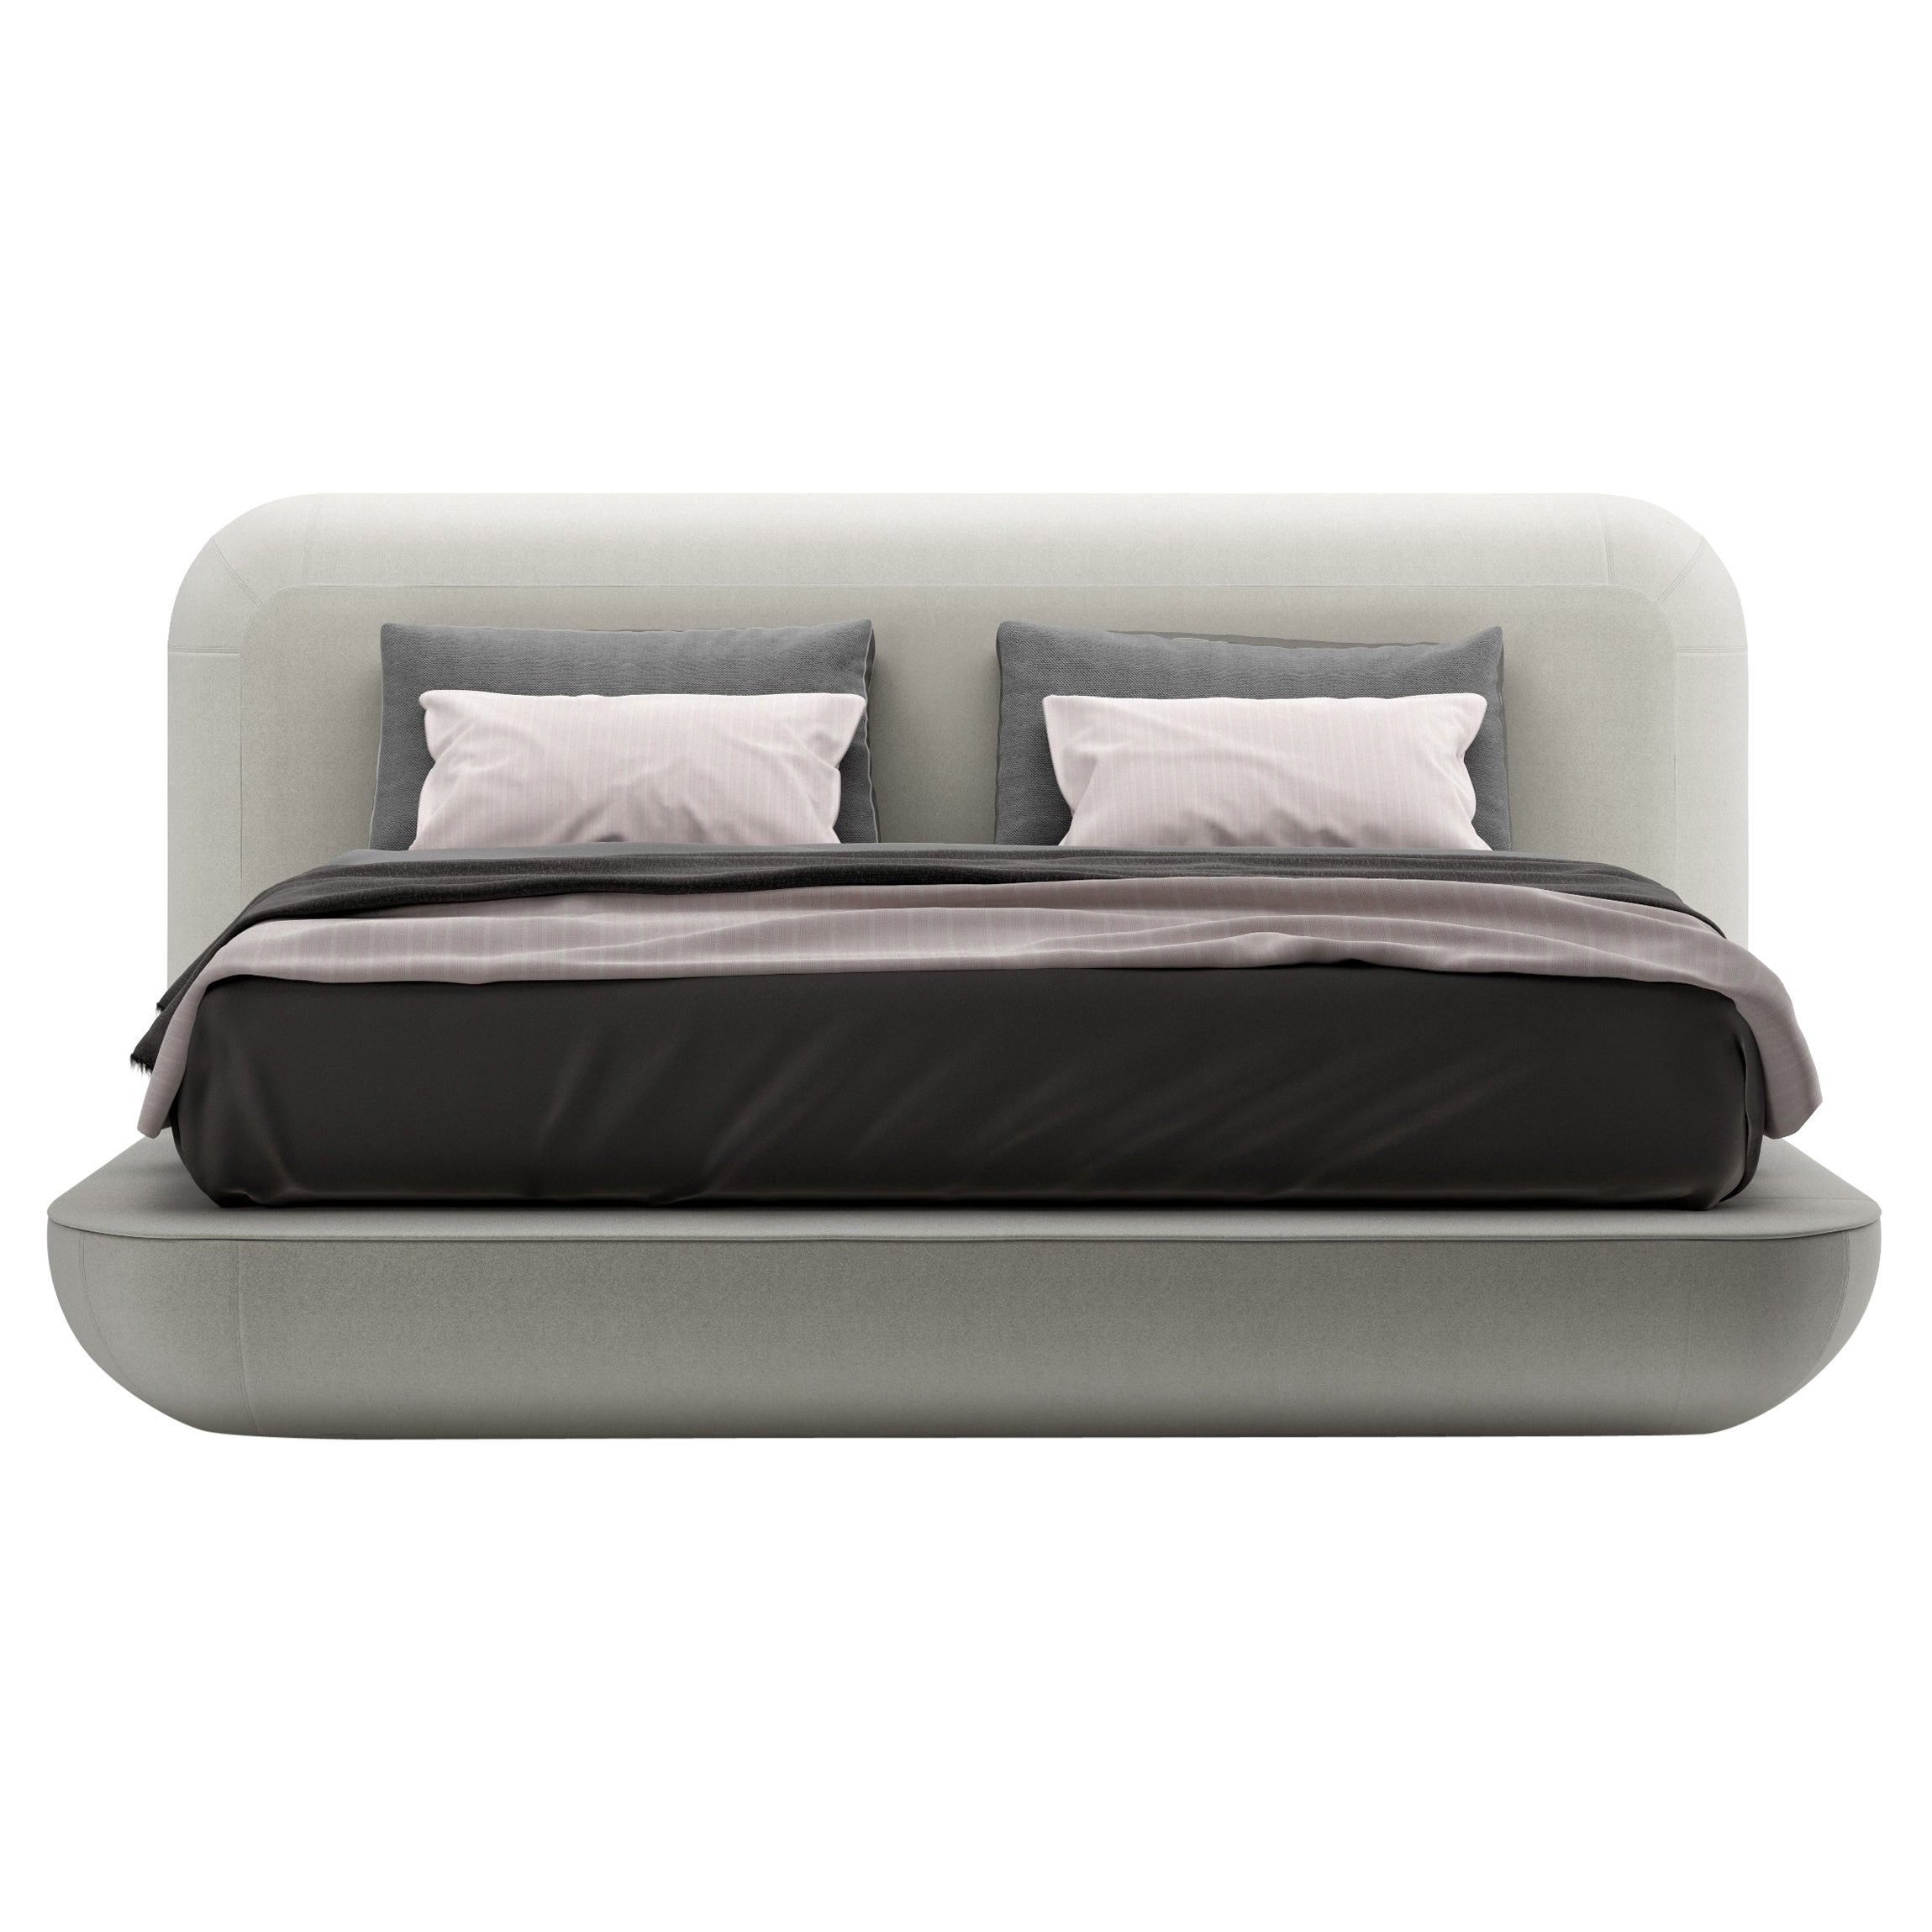 Alias 28A Large Okome Bed with Headboard Upholstered in White by Nendo For Sale